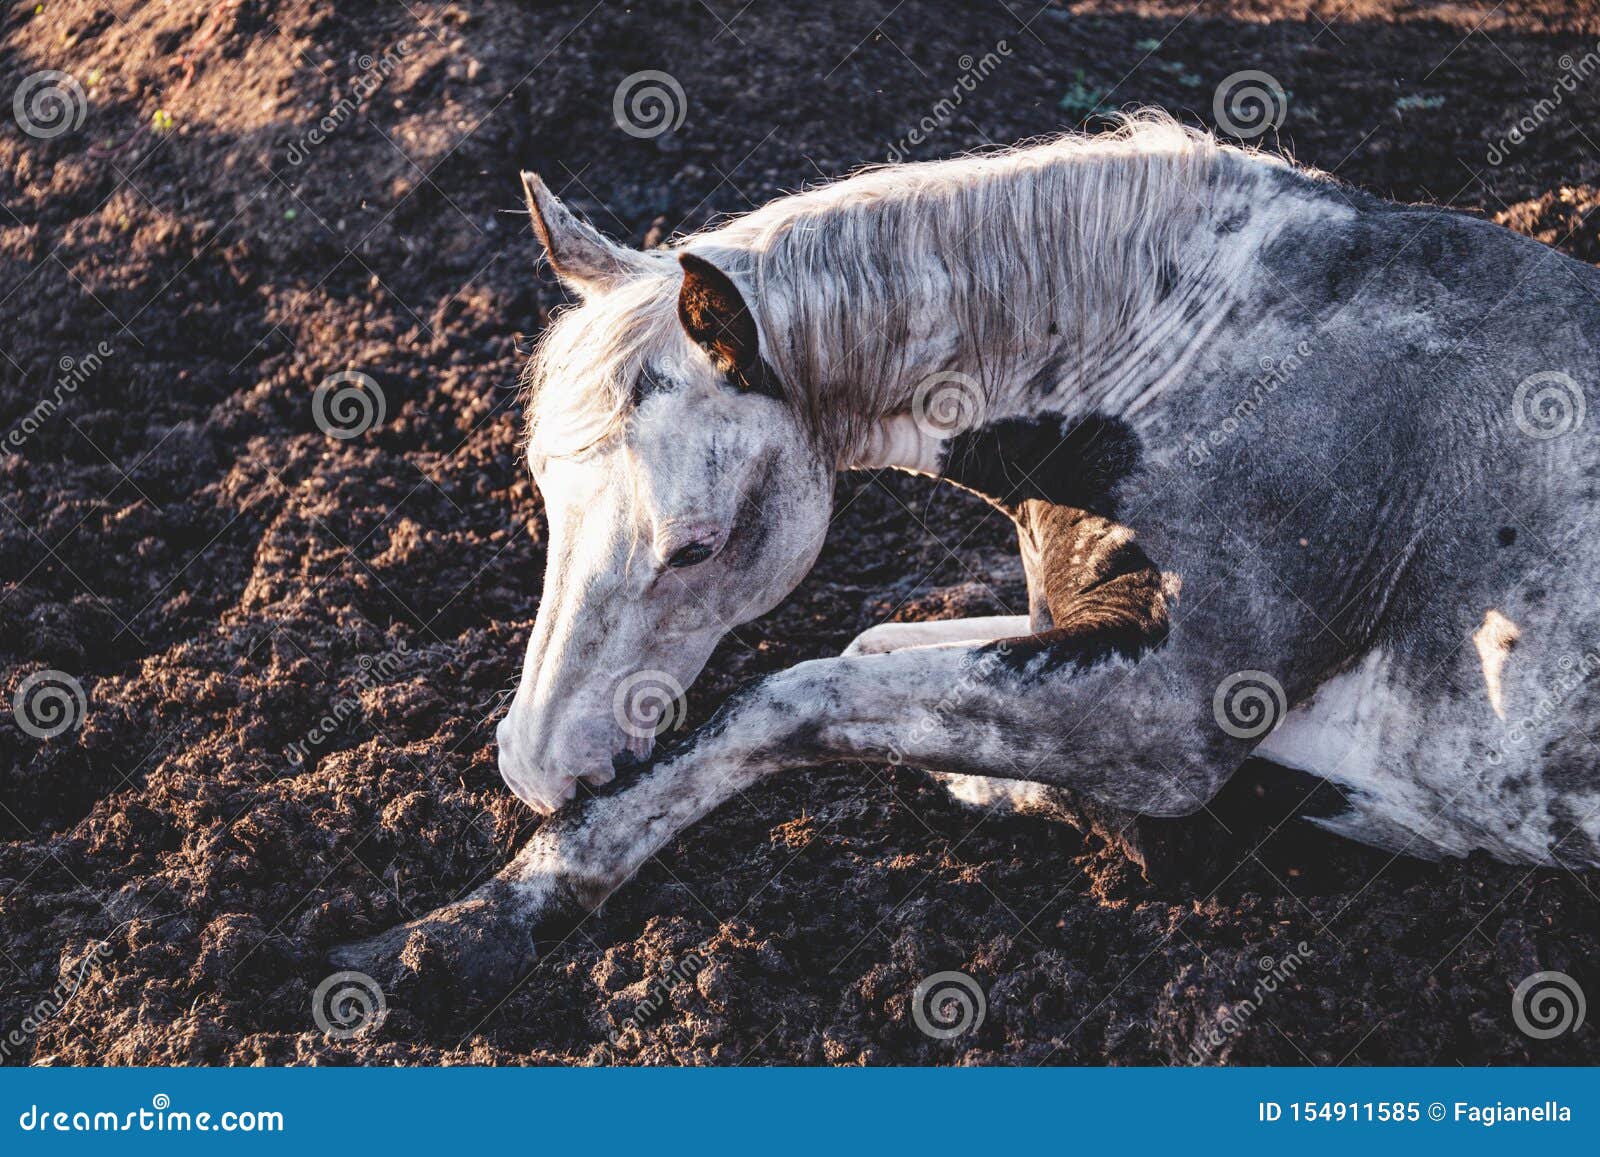 Old Paint Thoroughbred Horse Taking A Nap In His Paddock Lying Down In The Mud Sleeping Horse Stock Image Image Of Sleeping Life 154911585,Maple Trees In Fall